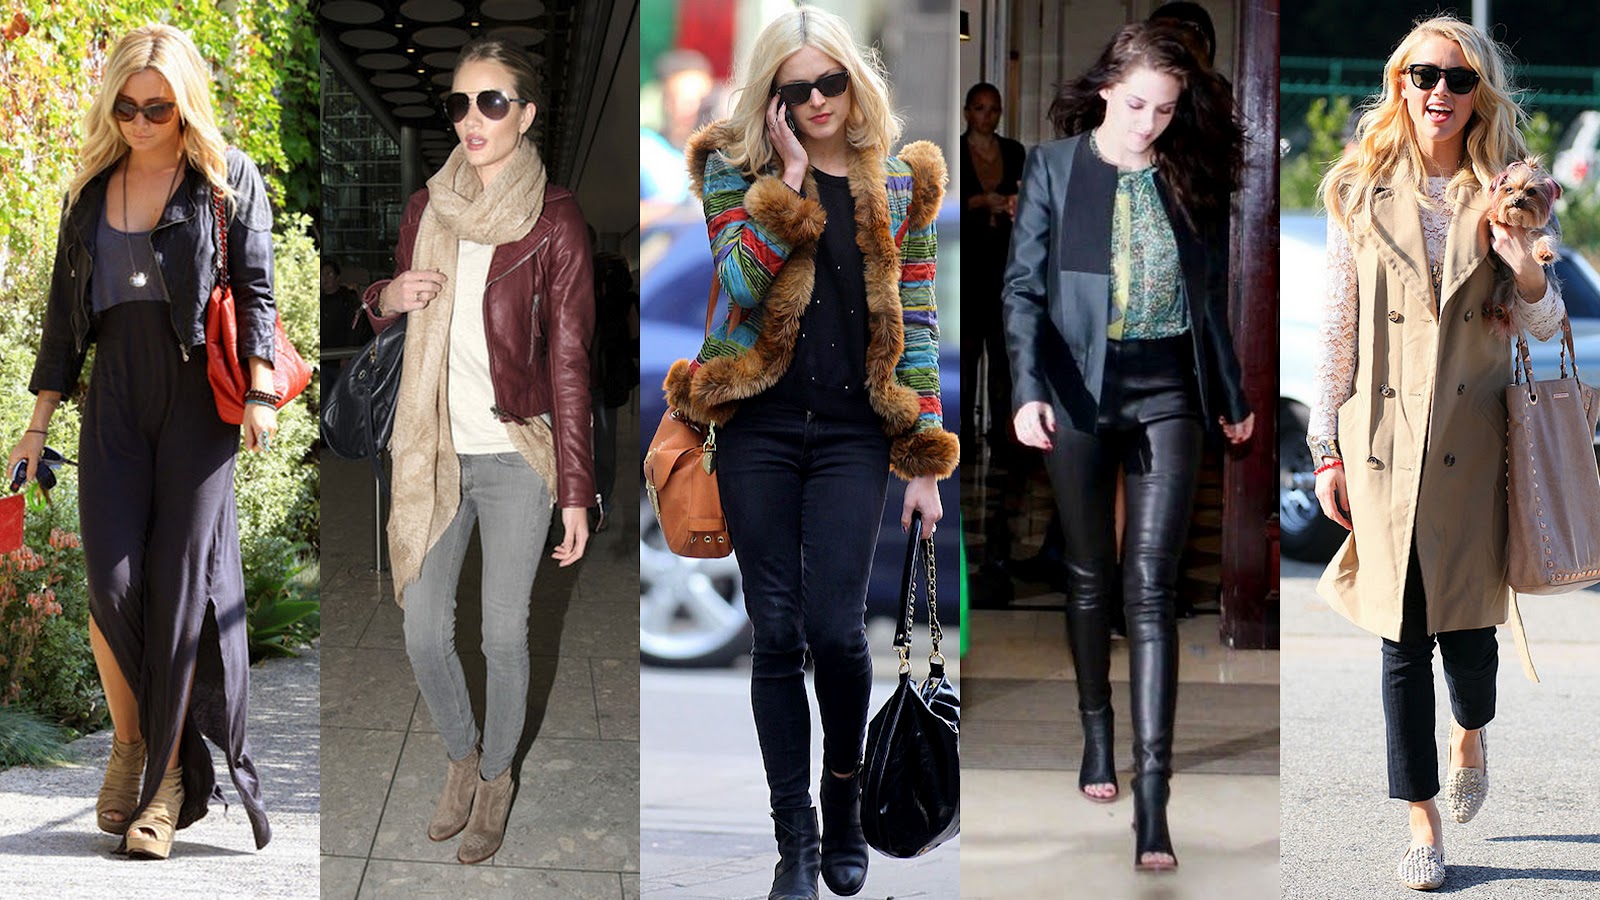 Frills and Thrills: Looks Of The Week - 03/03/2012